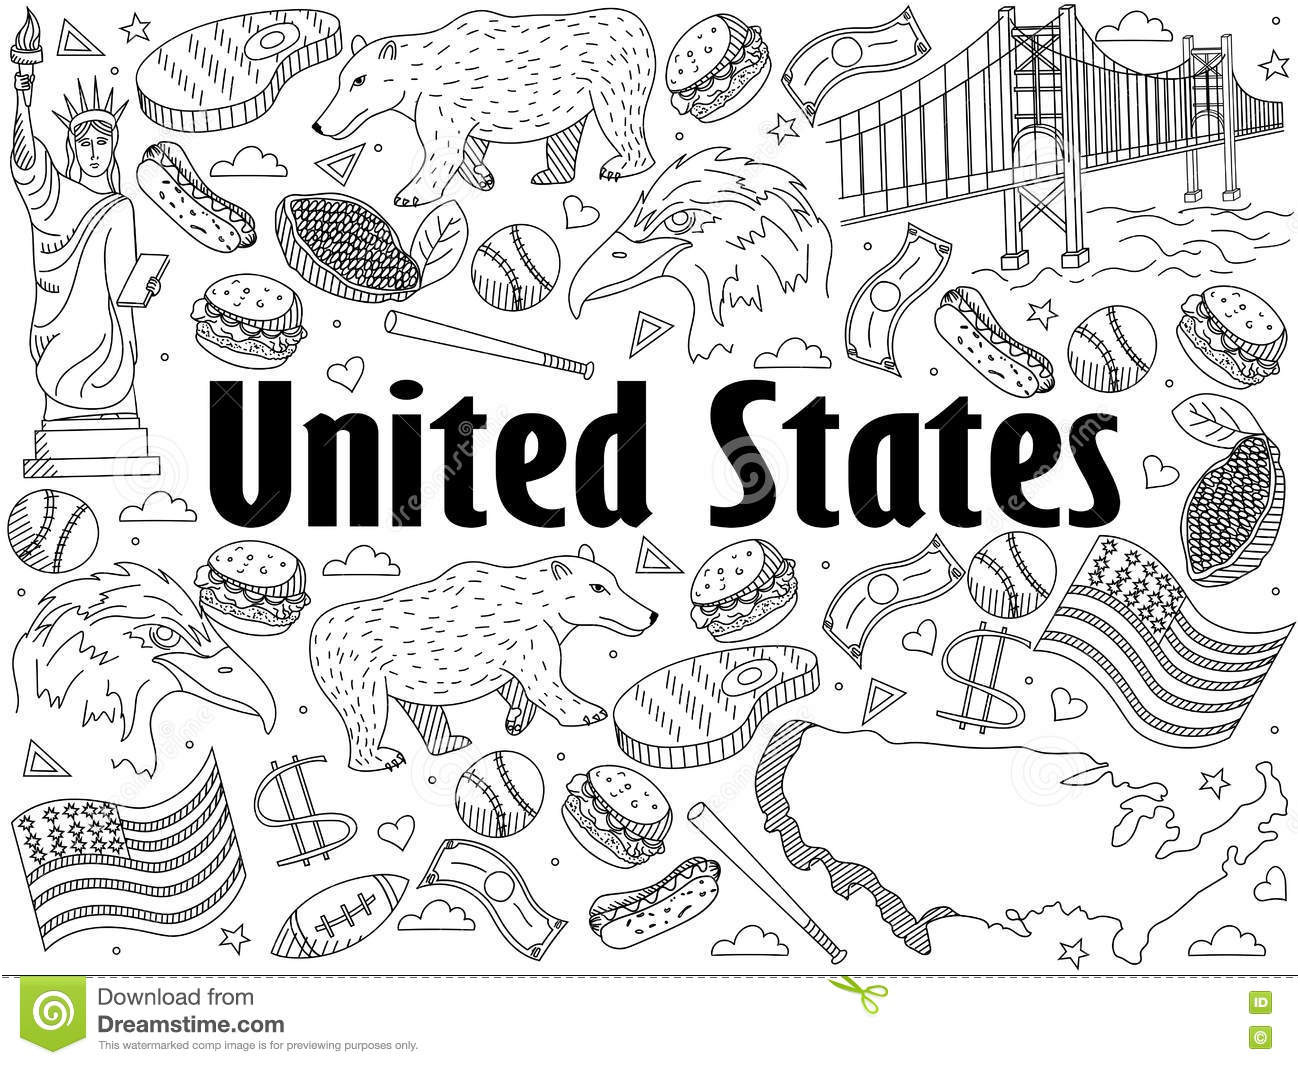 stock illustration united states coloring book vector illustration line art doodle set cartoon characters objects image